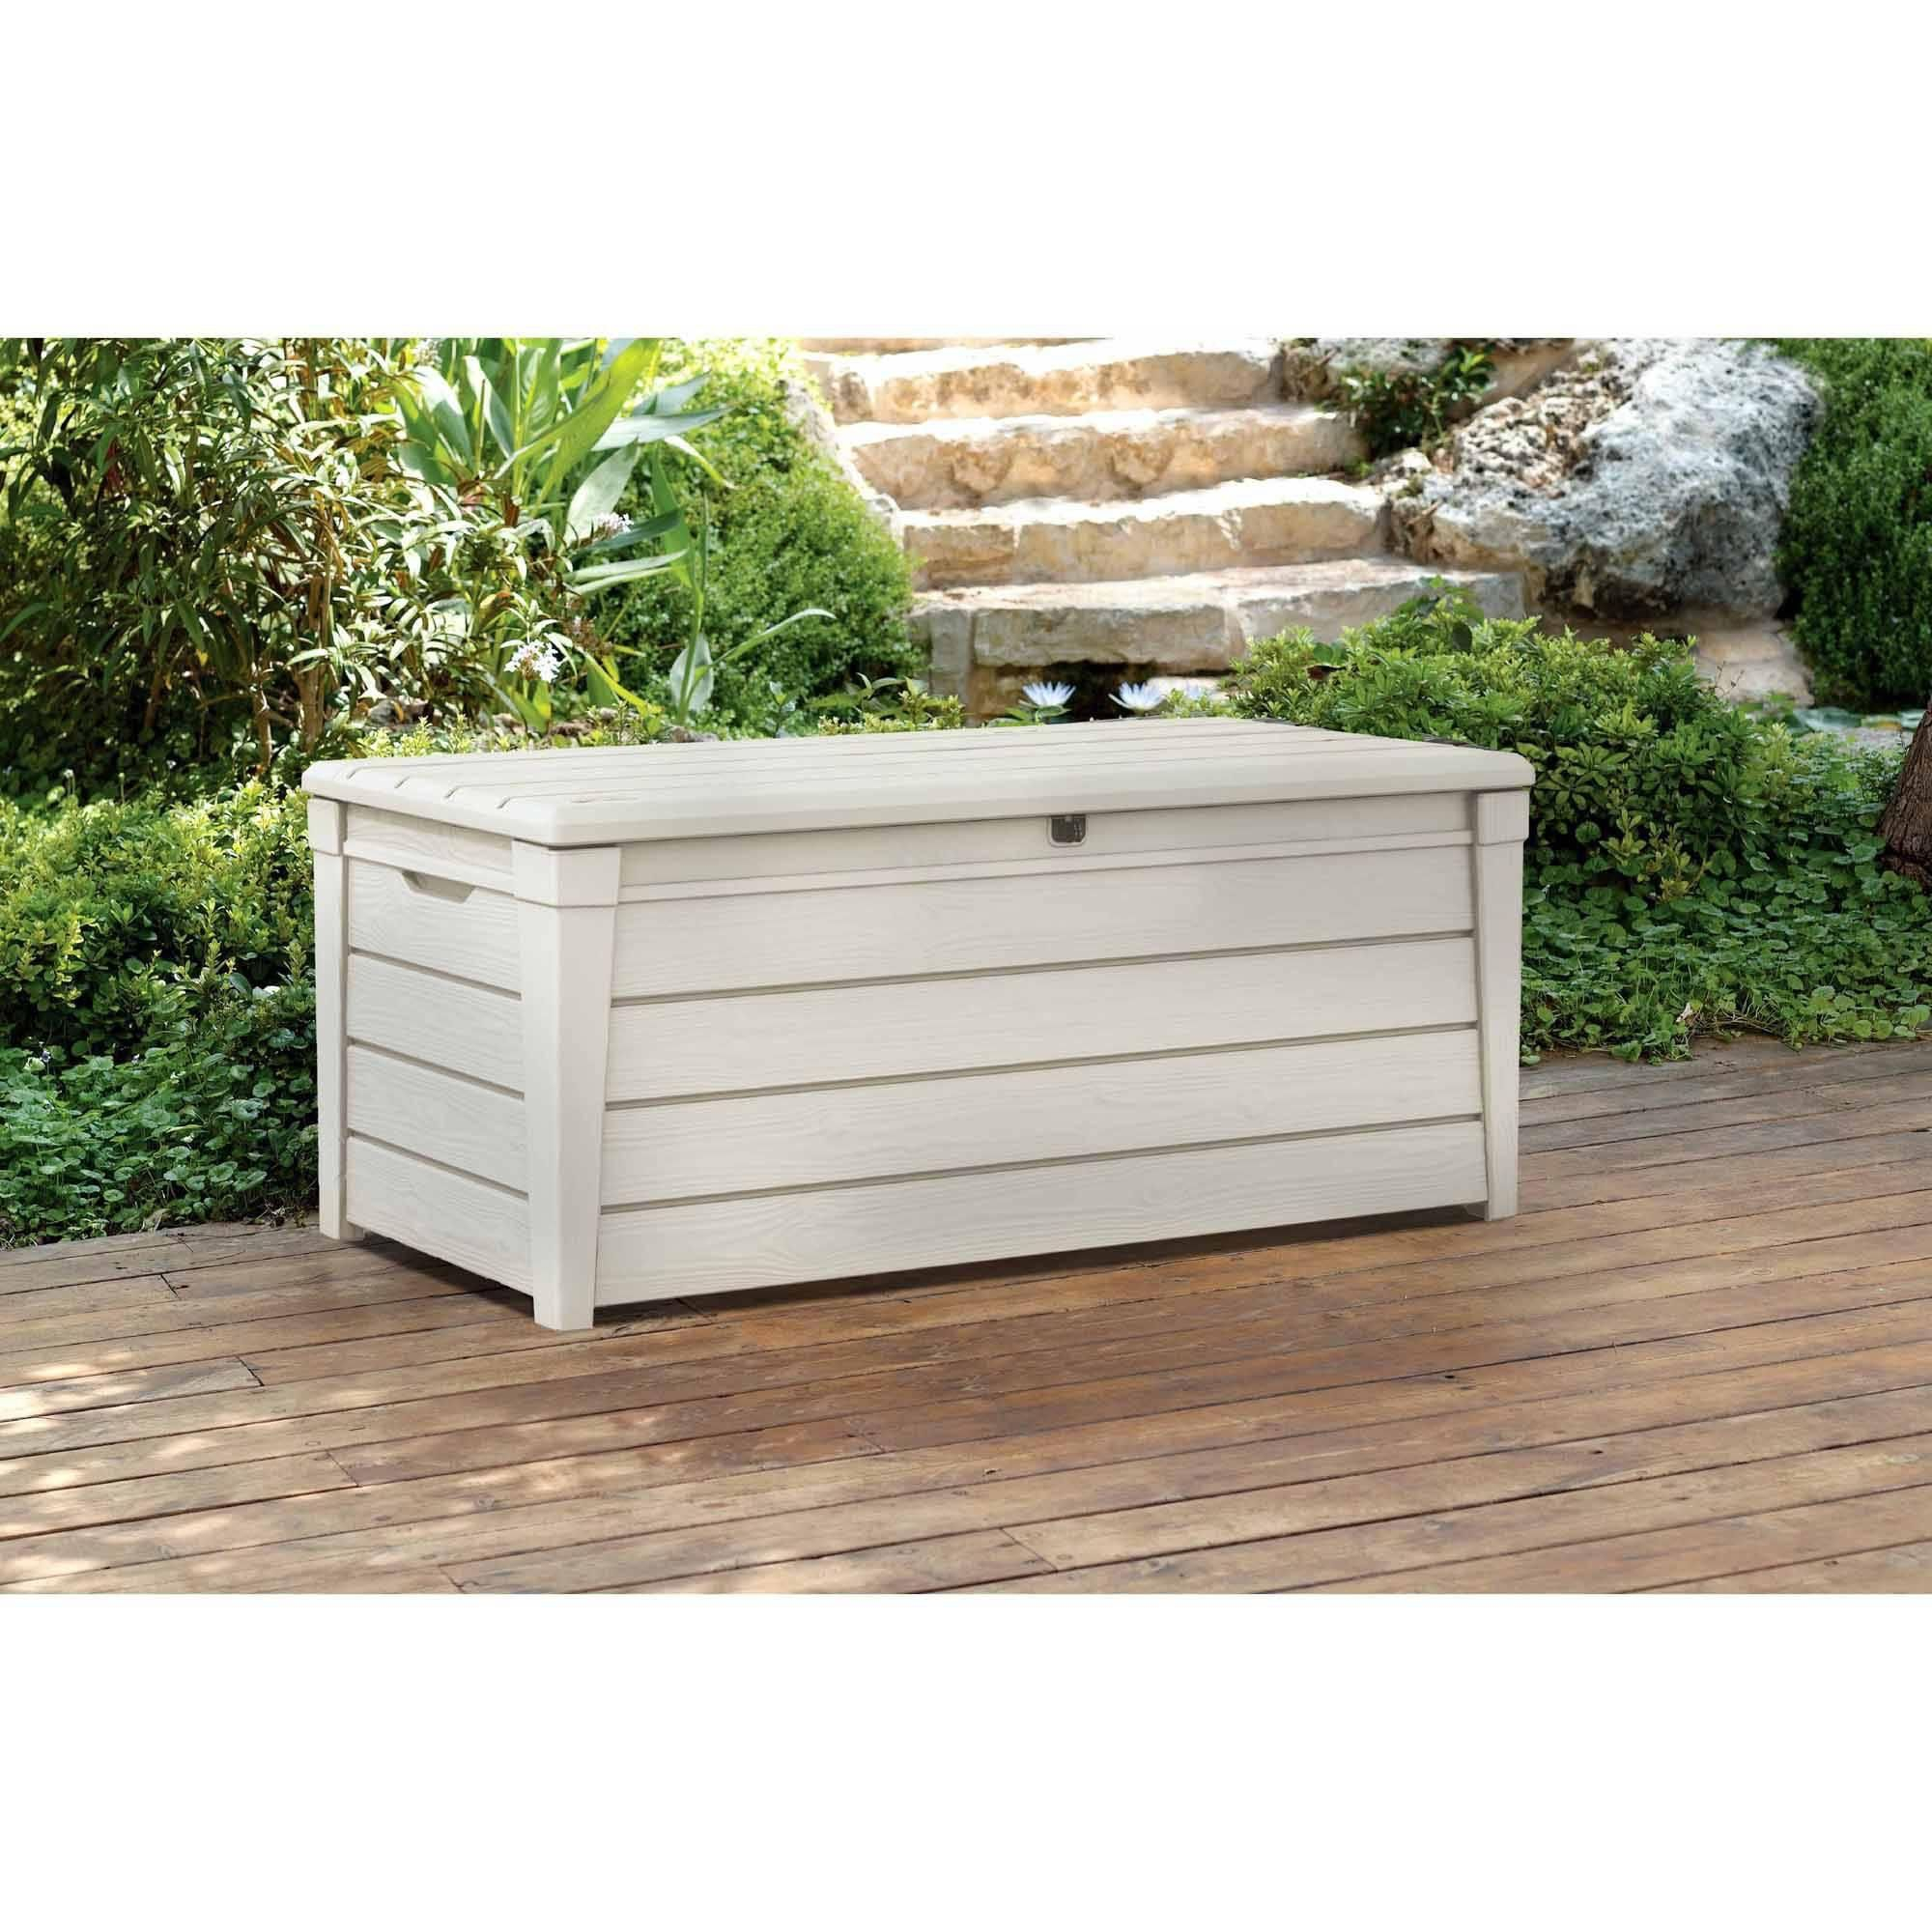 Keter Brightwood Outdoor Plastic Deck Storage Container Box 120 Gal with regard to dimensions 2000 X 2000